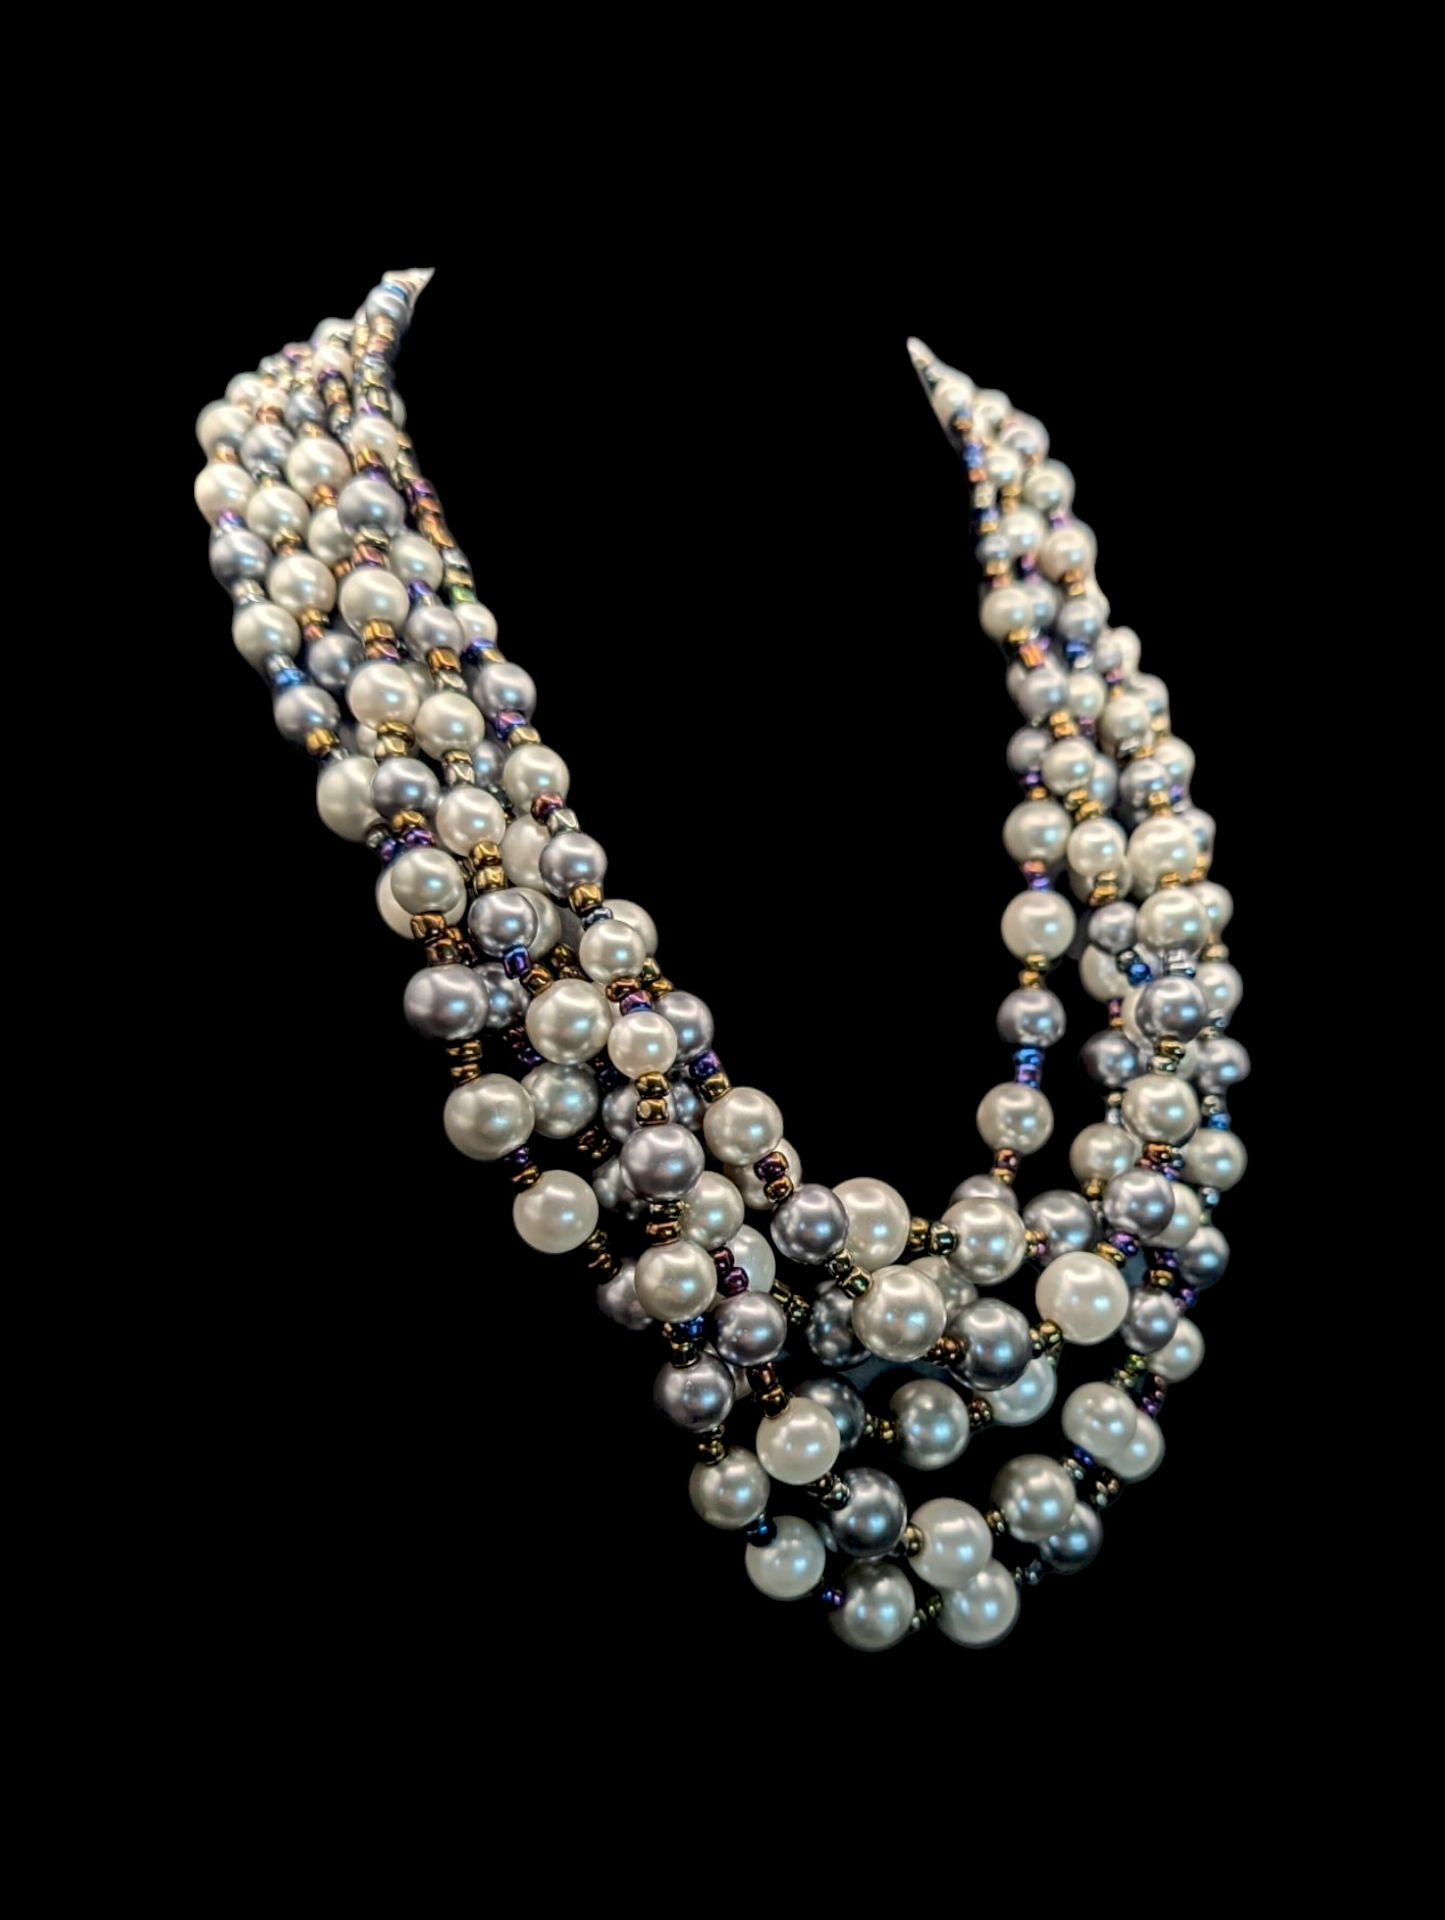 Vintage Unique 6 Strand Glass Pearl and Peacock Colored Crystal Bead Statement Necklace